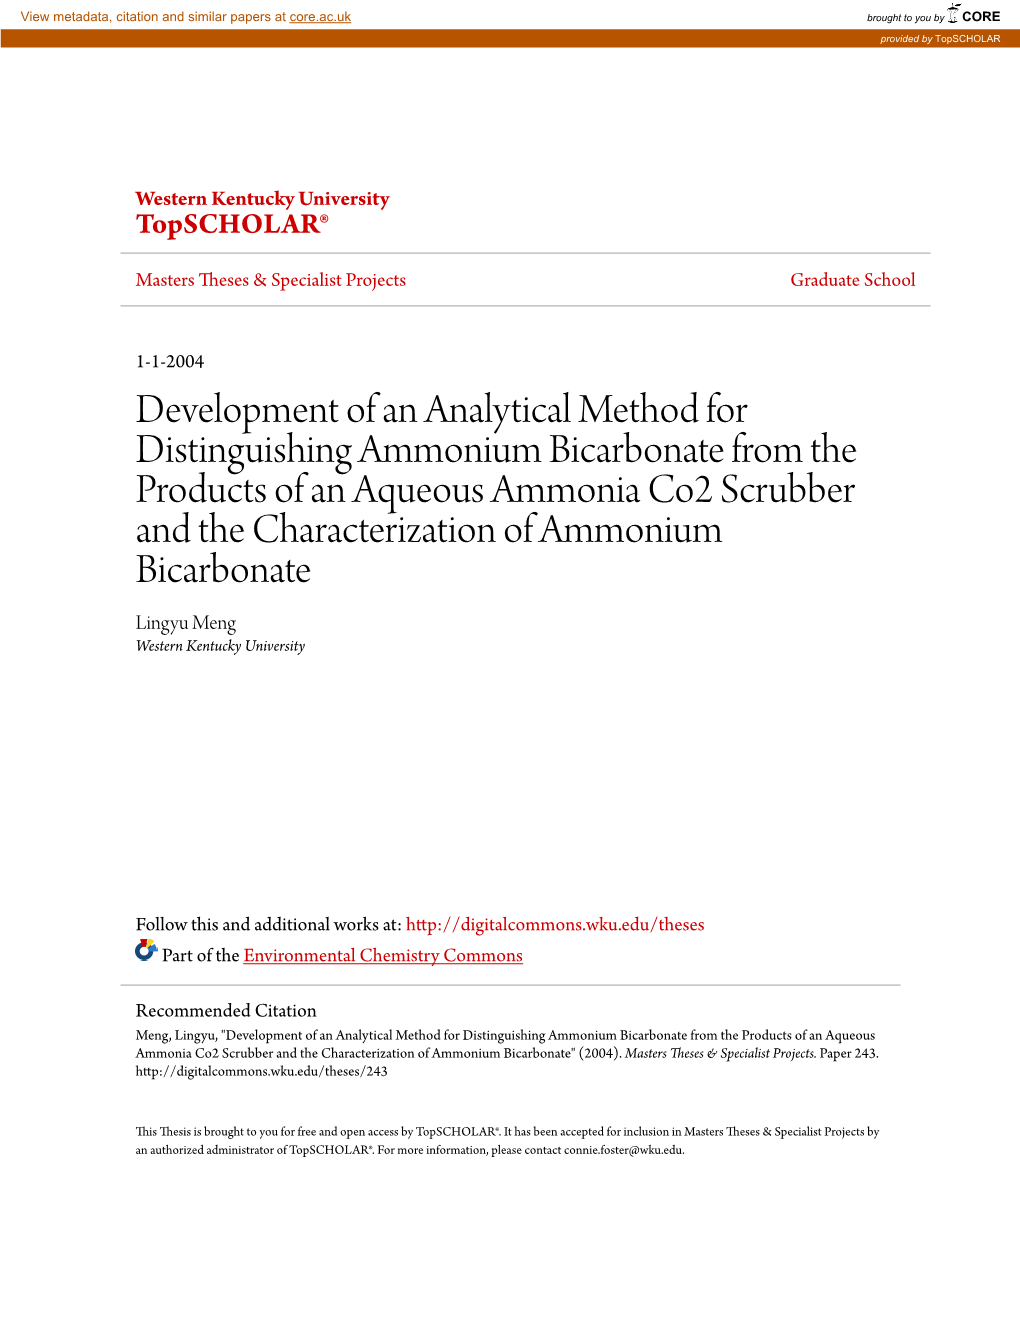 Development of an Analytical Method for Distinguishing